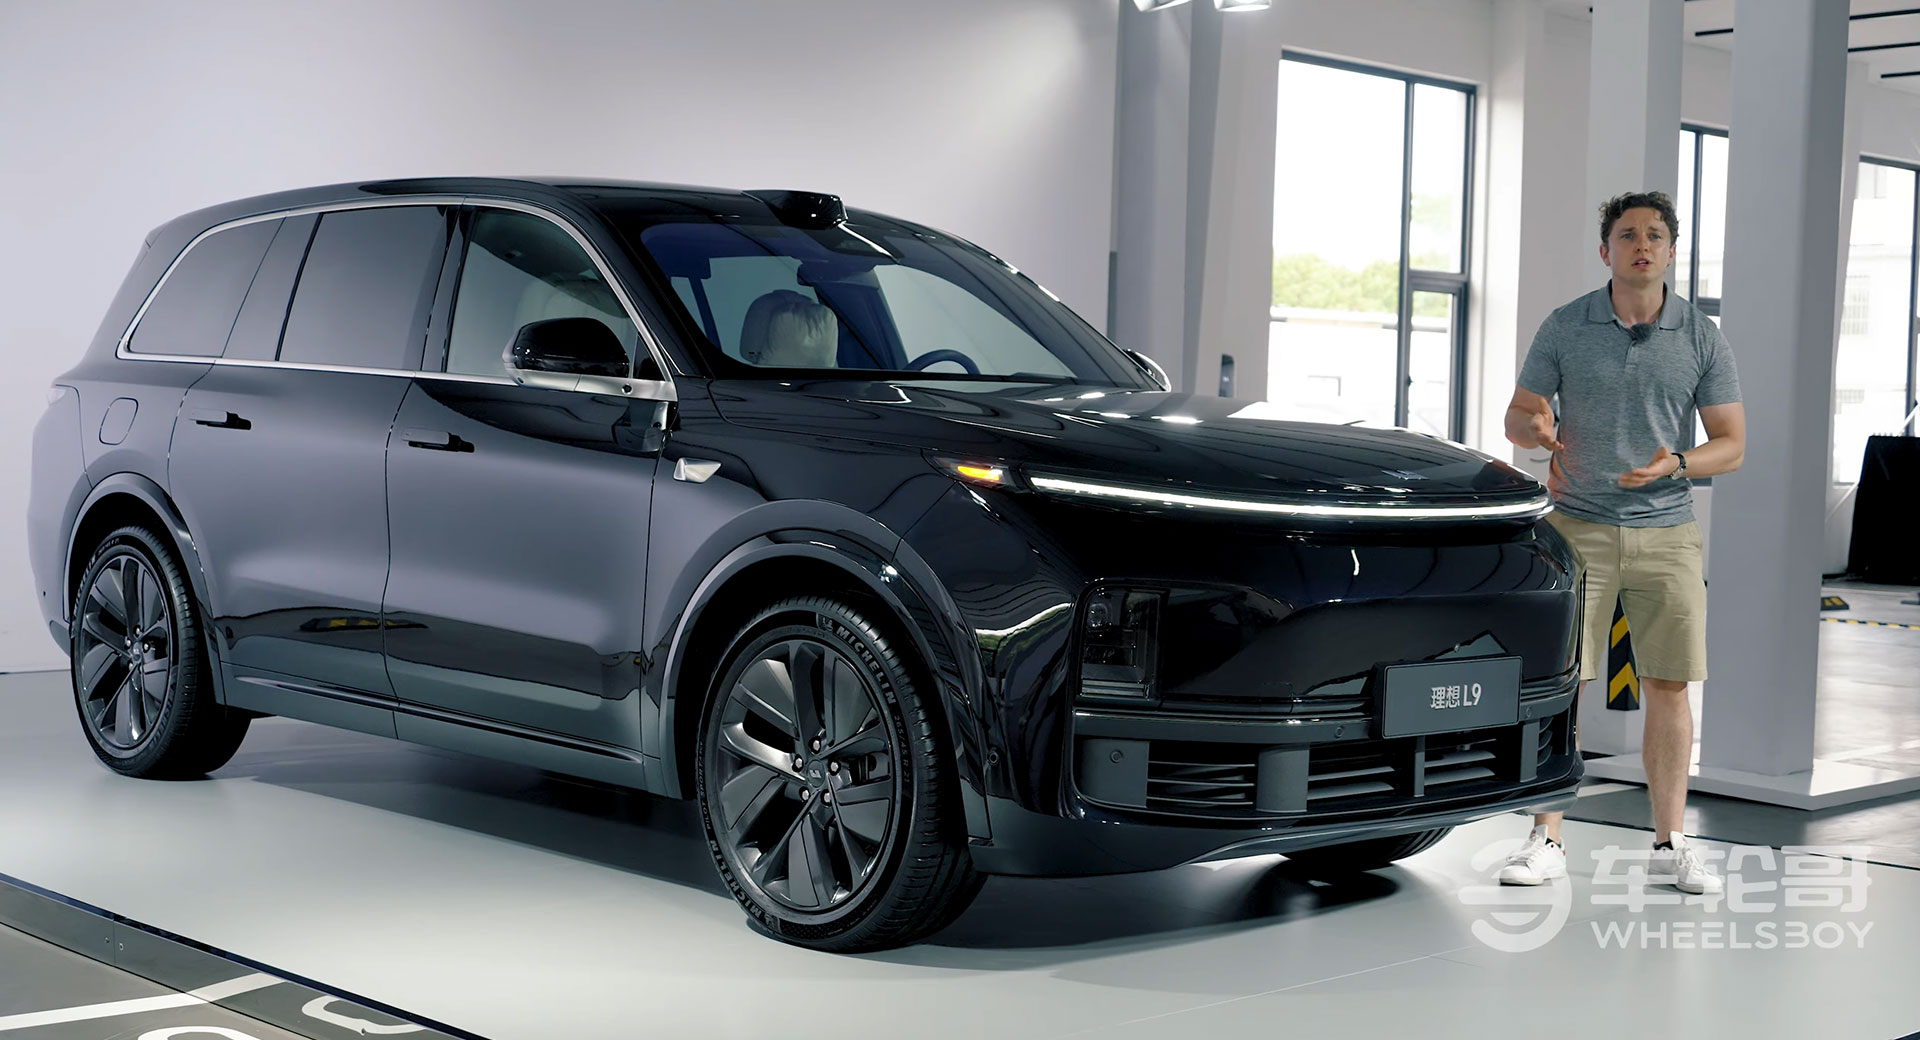 The L9 SUV From Li Auto Proves That The Chinese Really Are On A Roll